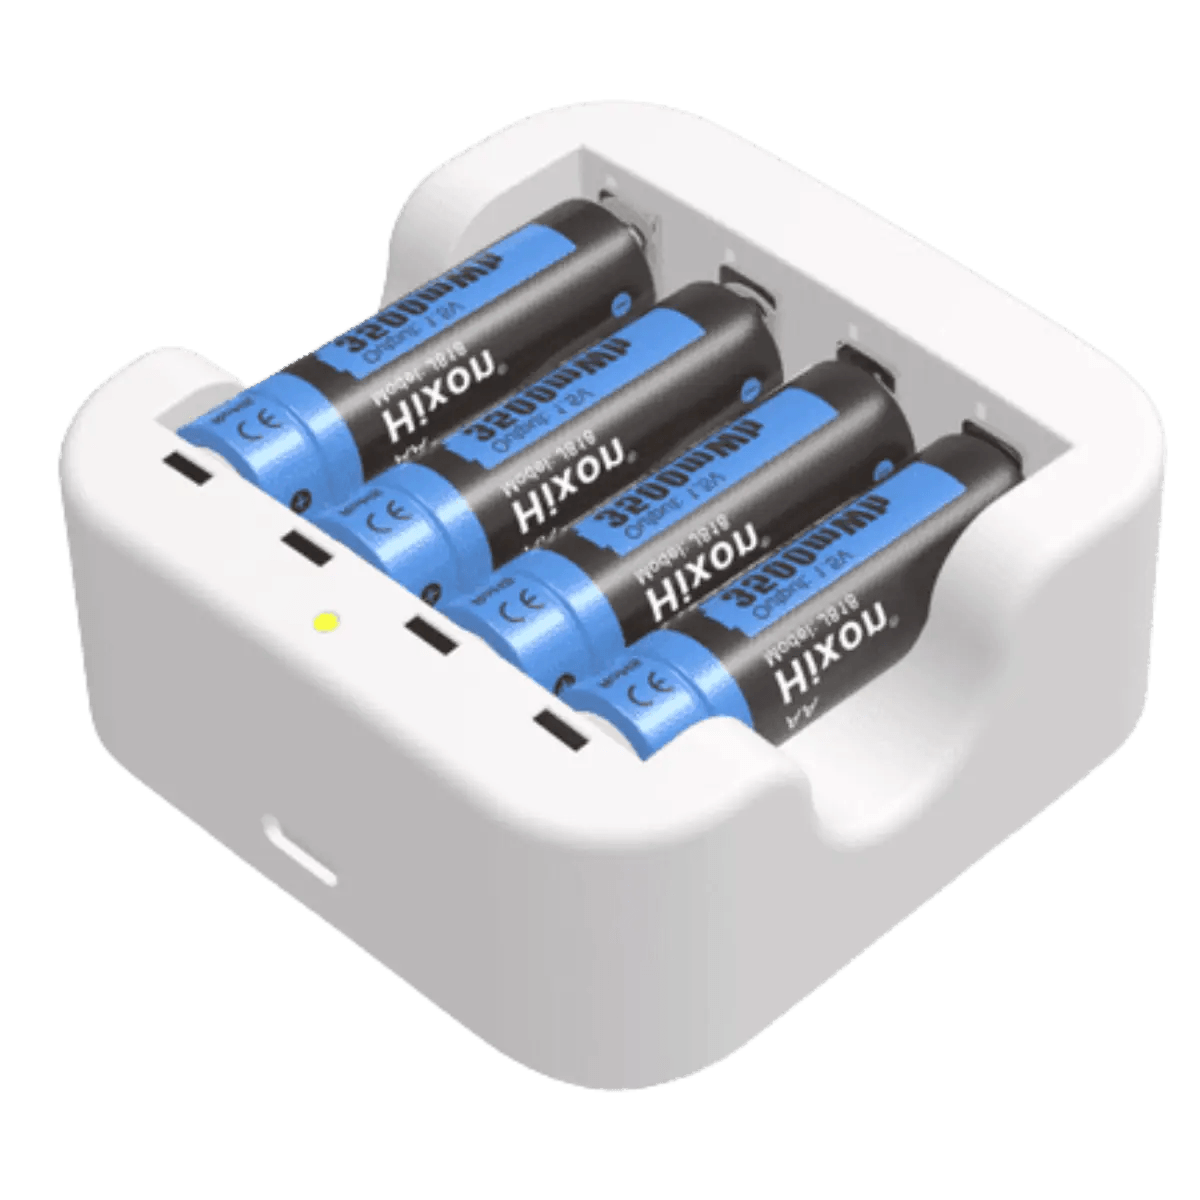 x4 Batteries rechargeables AA  LR6 1.5V + chargeur